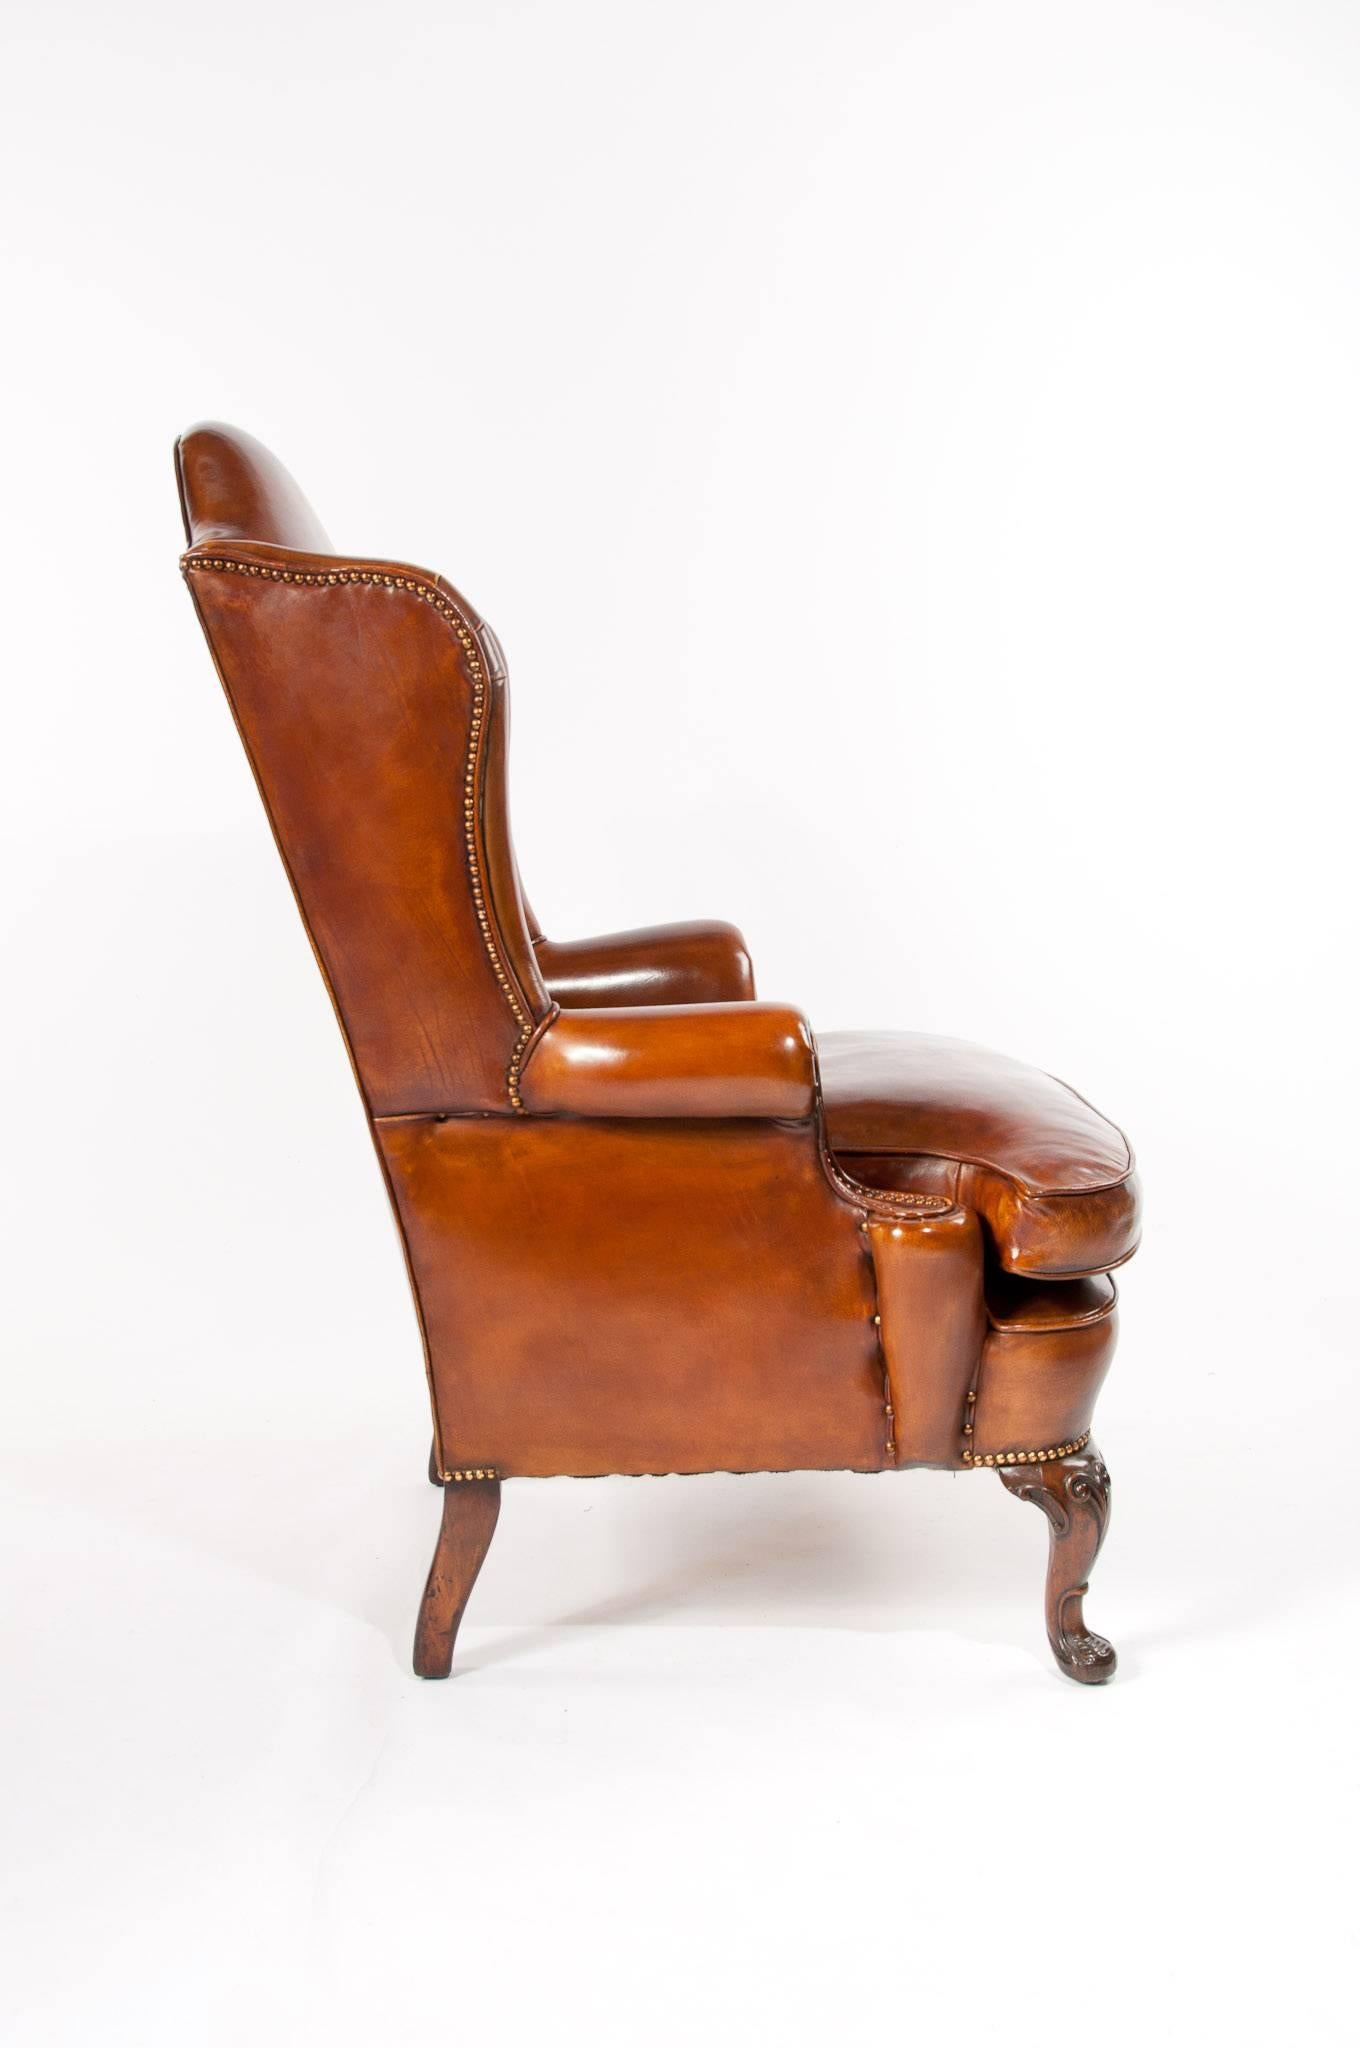 Superb Antique Walnut Leather Wingback Armchair, Mid-19th Century 2